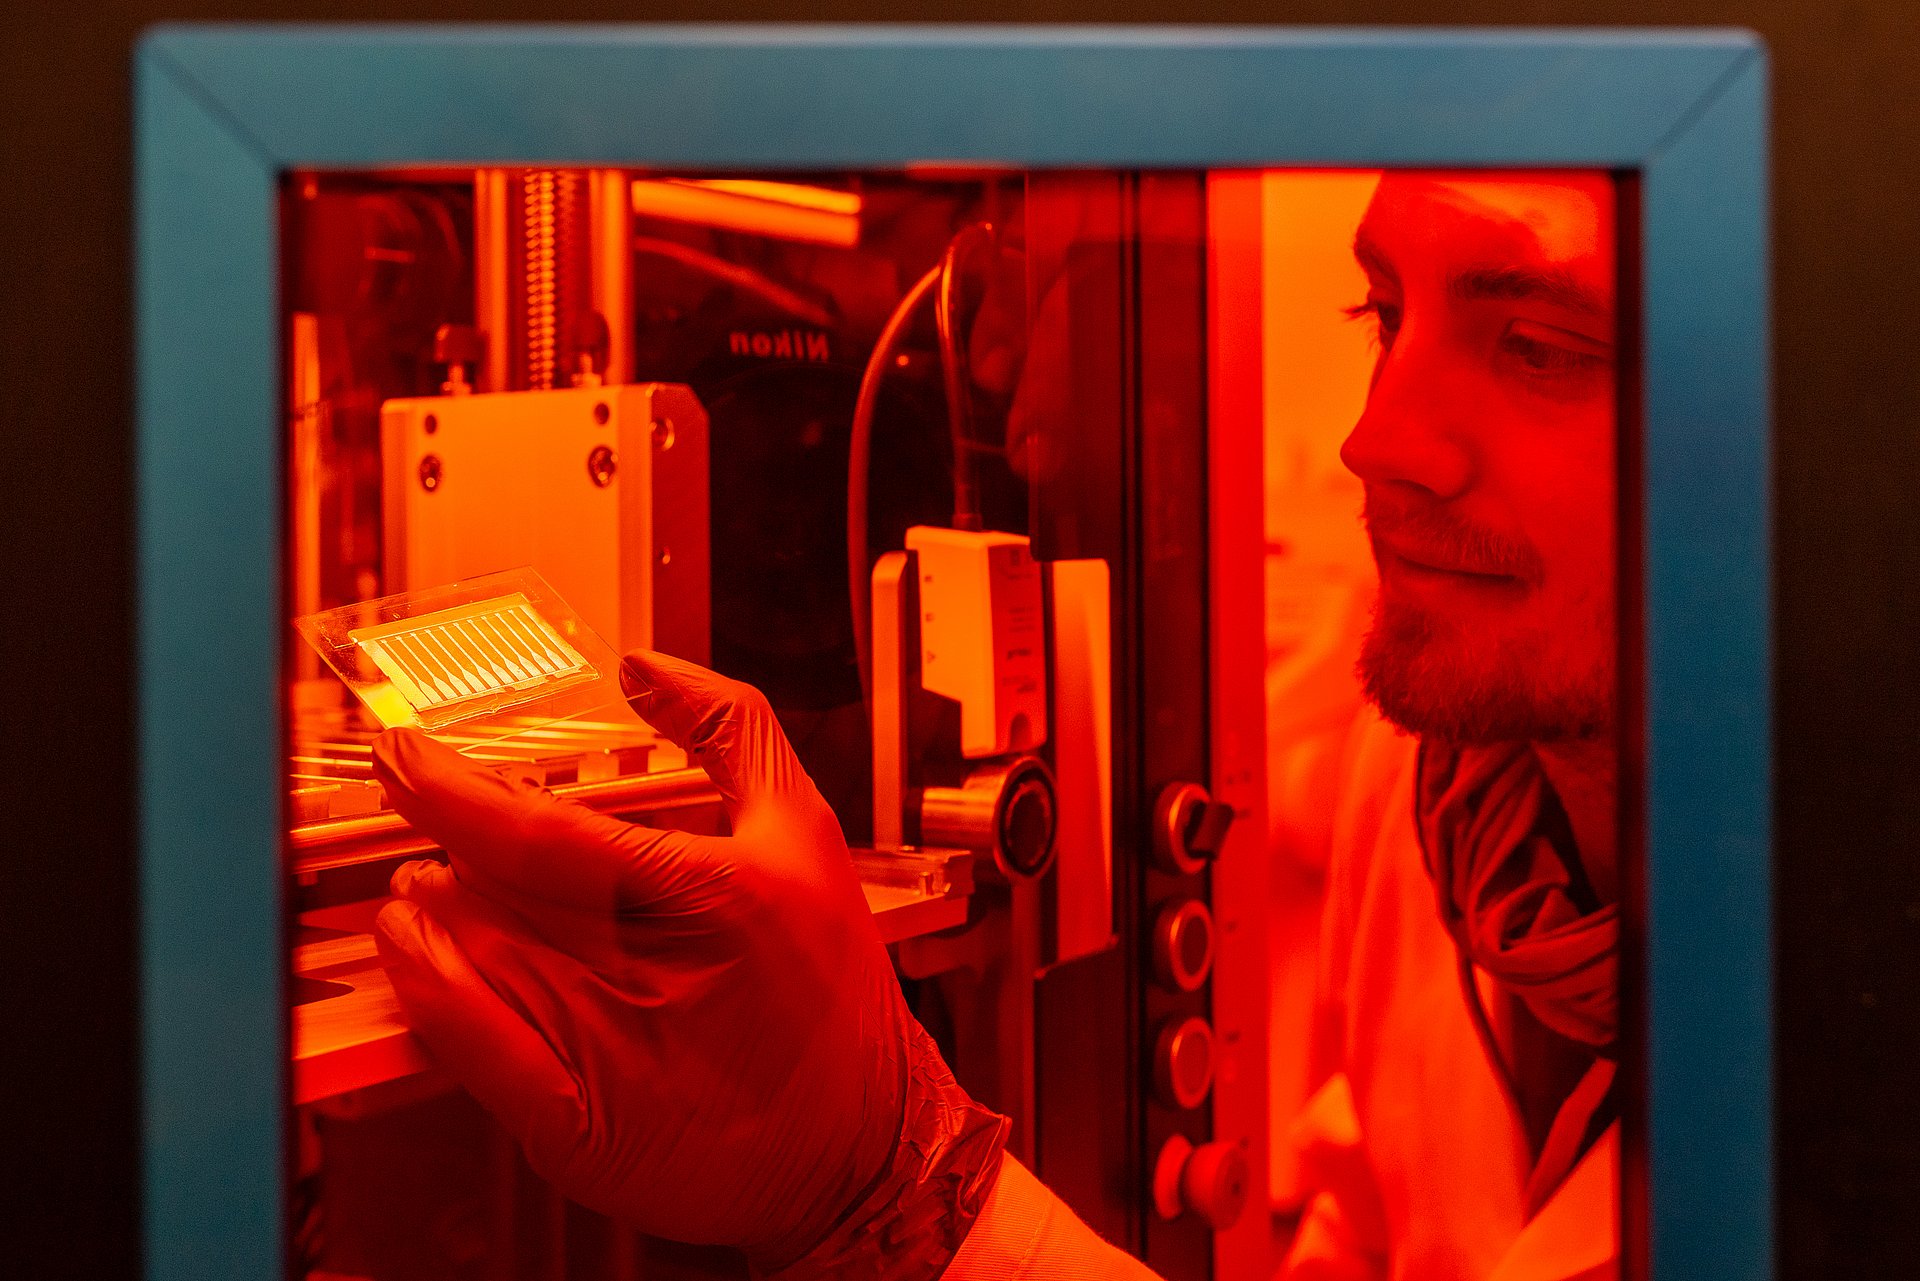 Laser pulses are used to structure the gold layer into conductive patterns. Lukas Hiendlmeier removes the structured samples from the laser system and examines them.